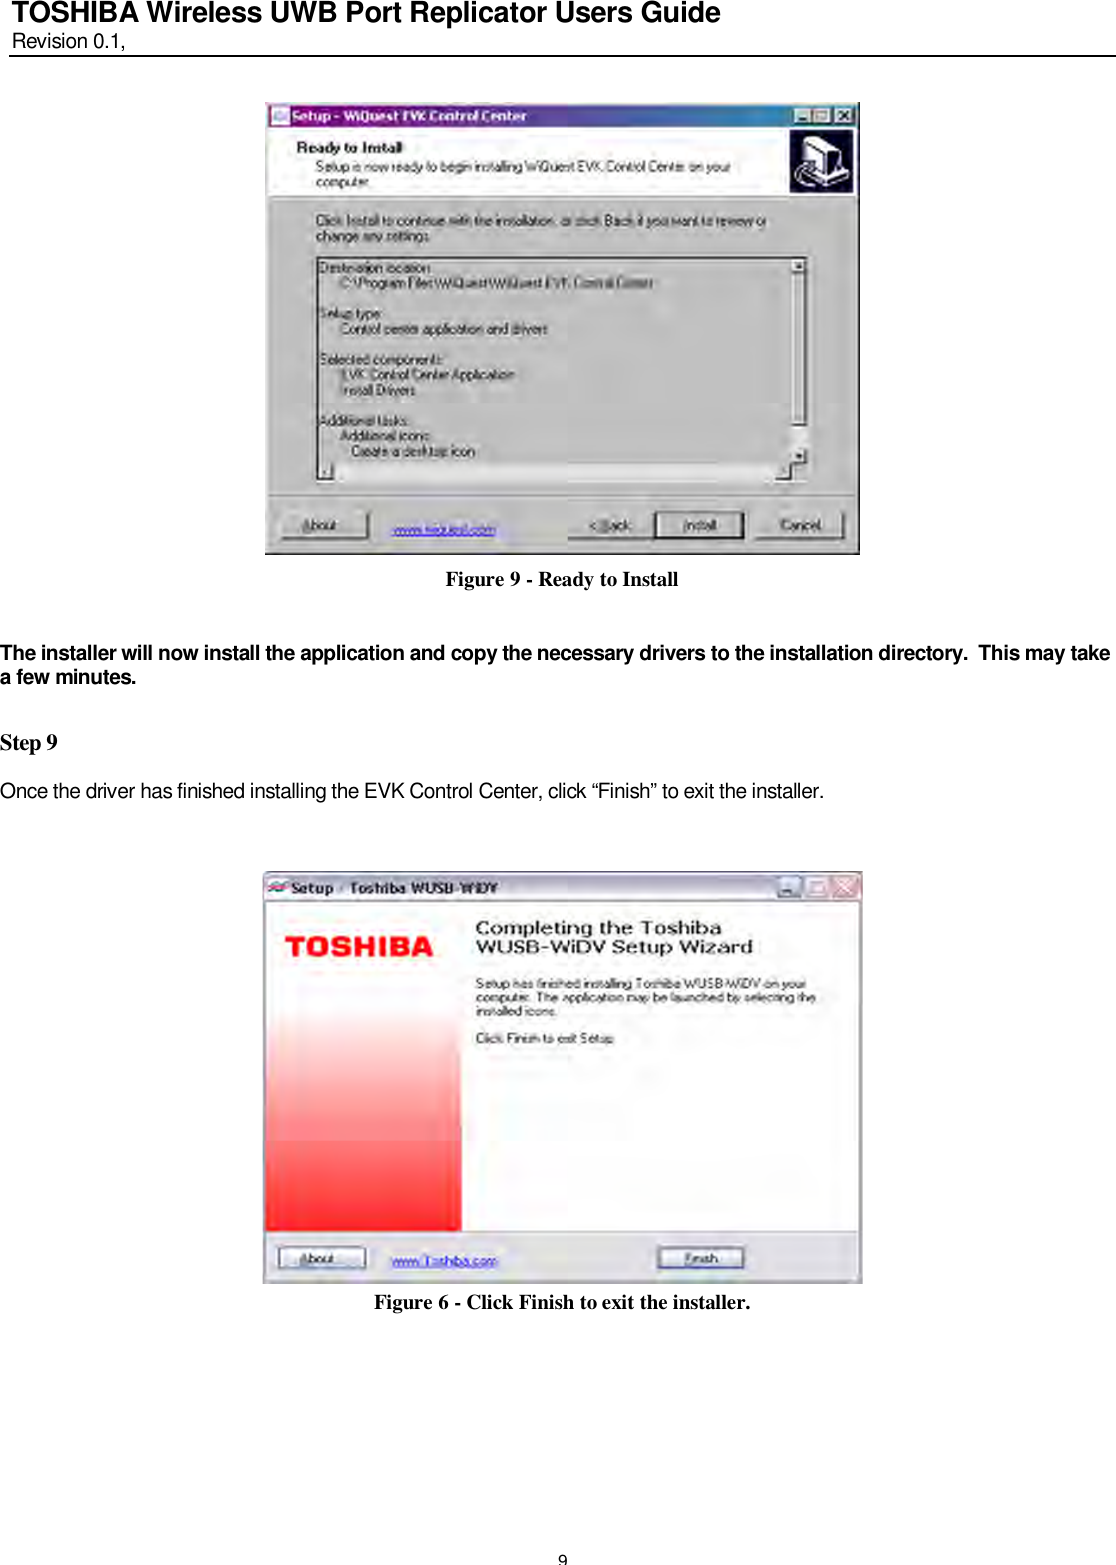   9 TOSHIBA Wireless UWB Port Replicator Users Guide Revision 0.1,    Figure 9 - Ready to Install  The installer will now install the application and copy the necessary drivers to the installation directory.  This may take a few minutes.  Step 9  Once the driver has finished installing the EVK Control Center, click “Finish” to exit the installer.                    Figure 6 - Click Finish to exit the installer.      